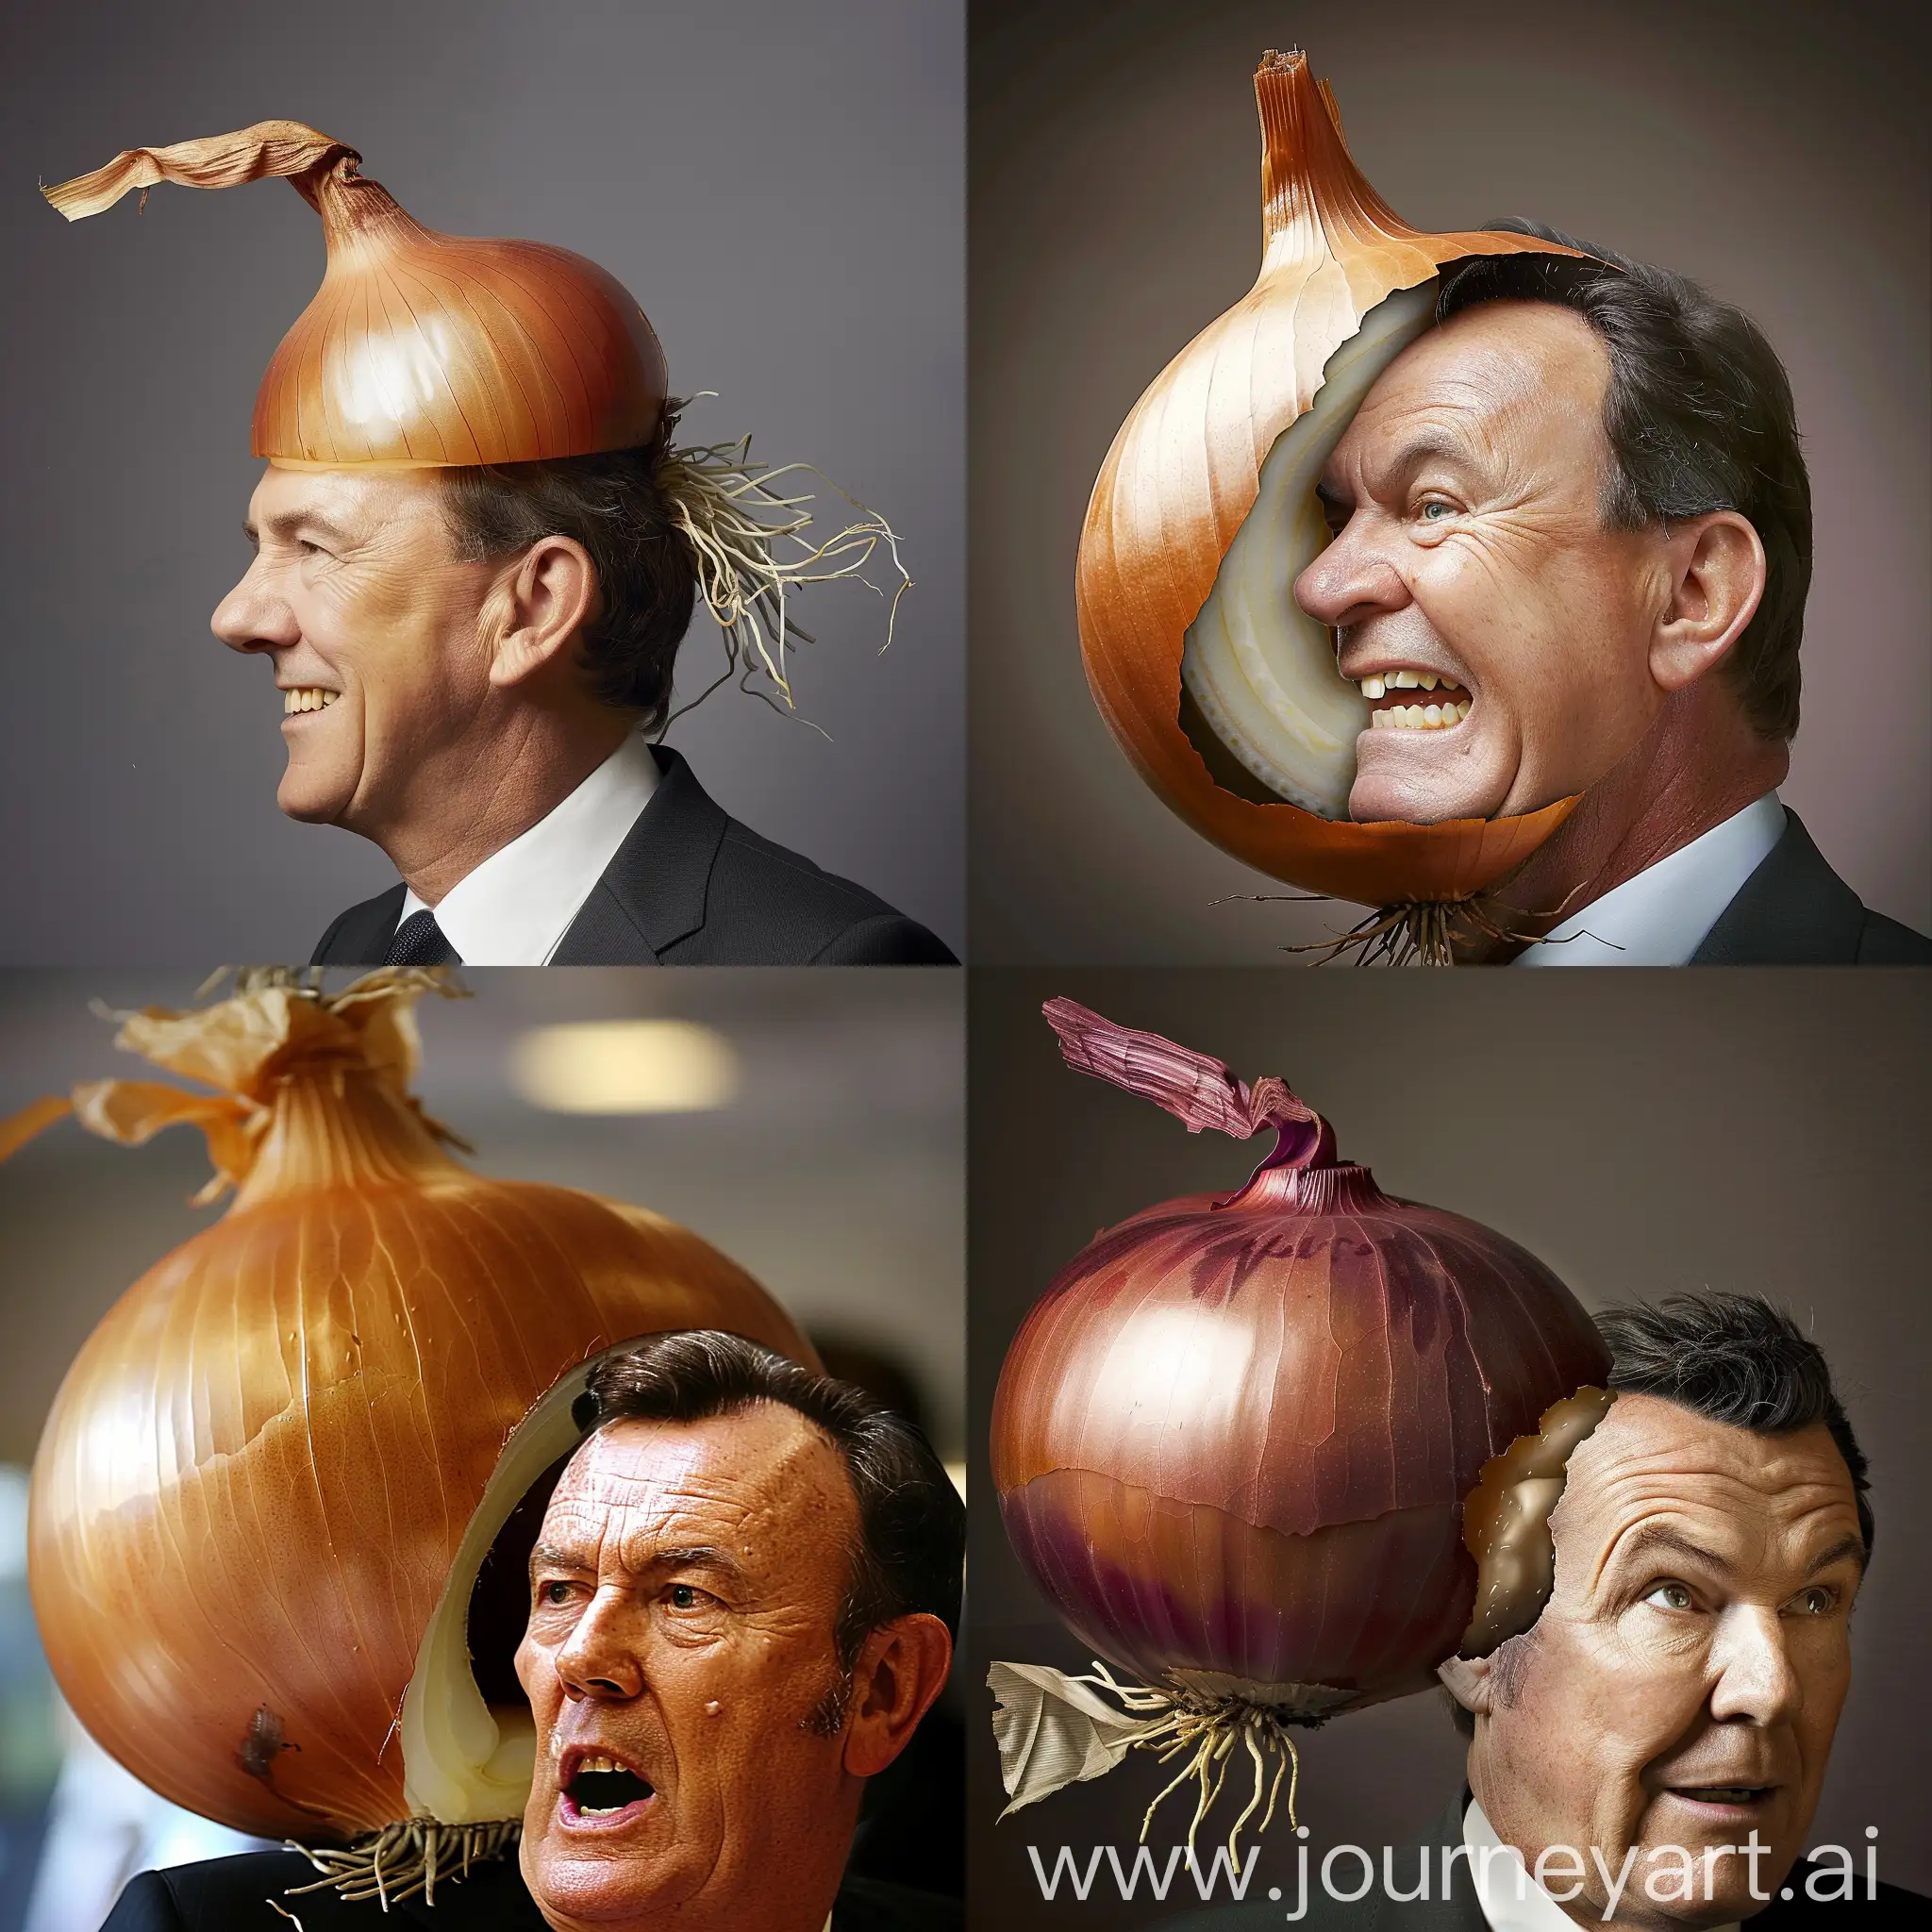 a large anthropomorphic onion biting into the head of politician Tony Abbot, in the style of a newspaper photograph